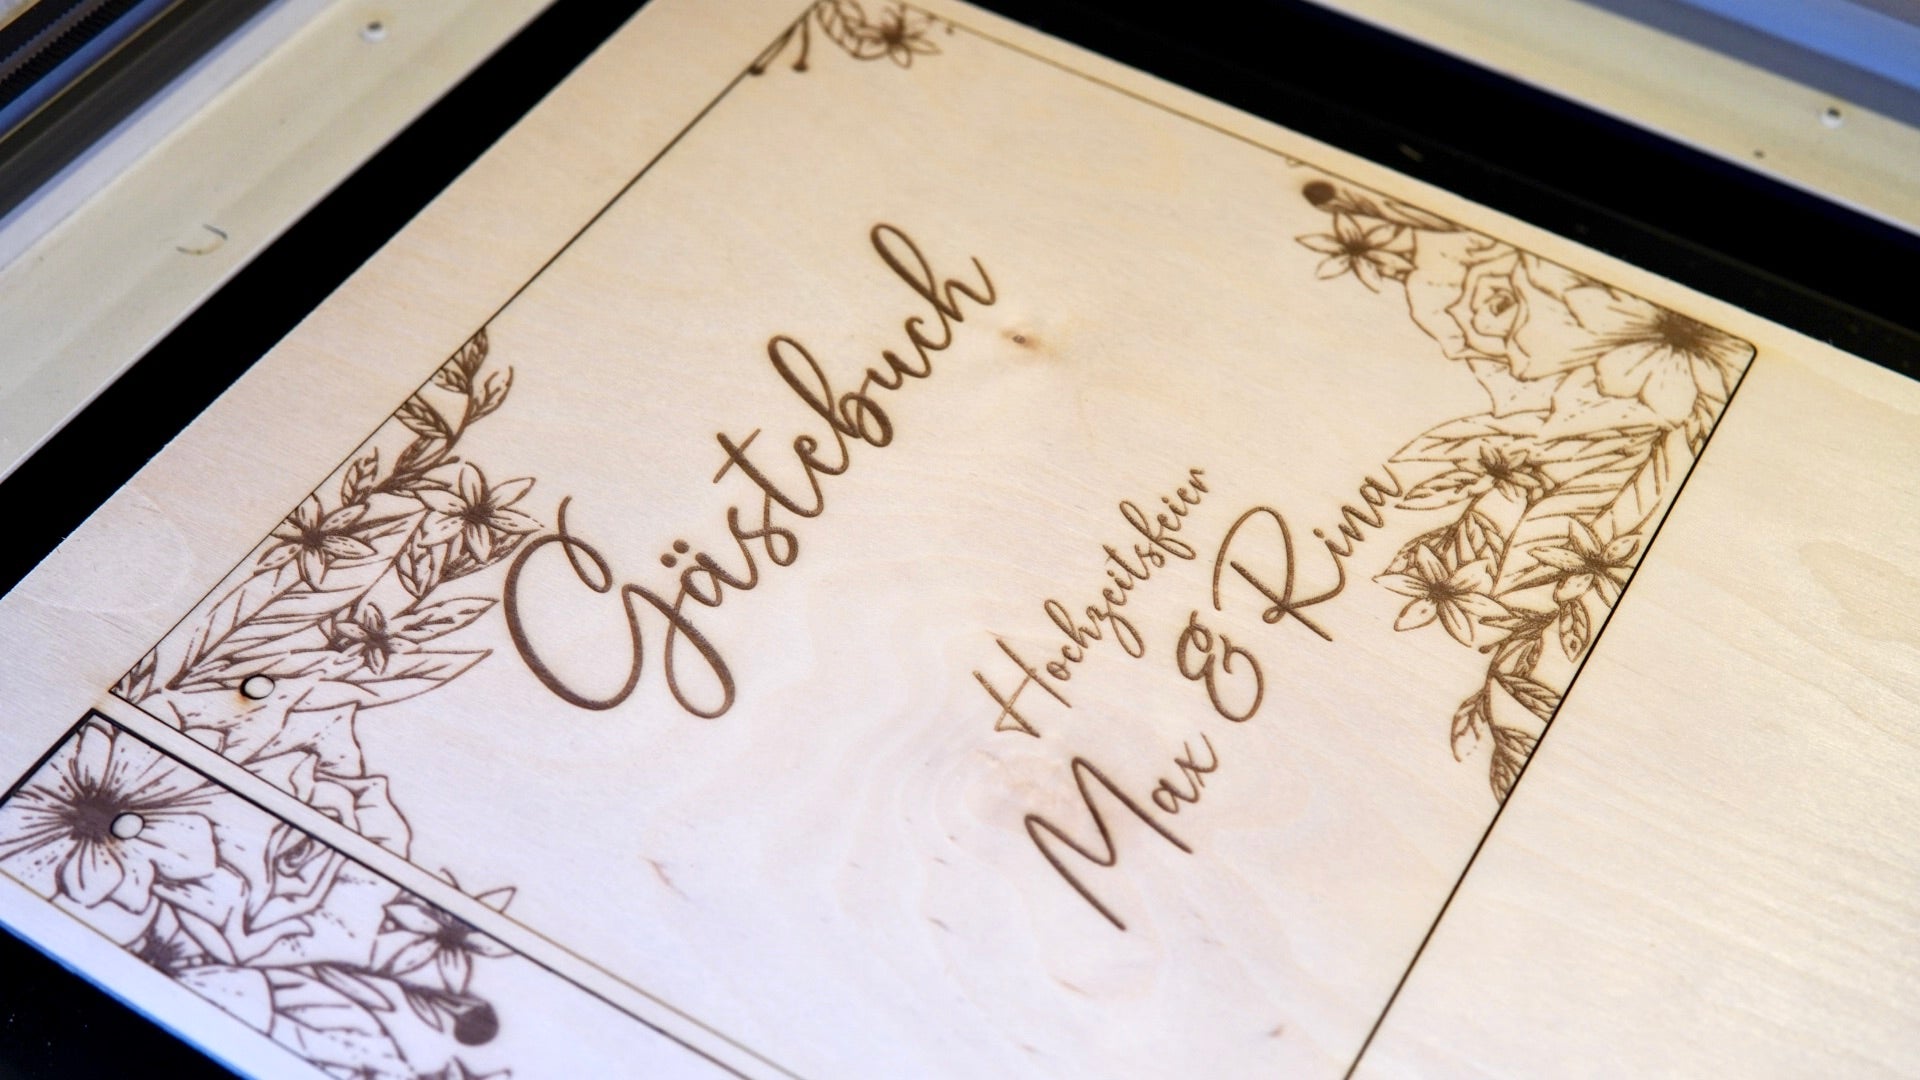 Engraving guest book